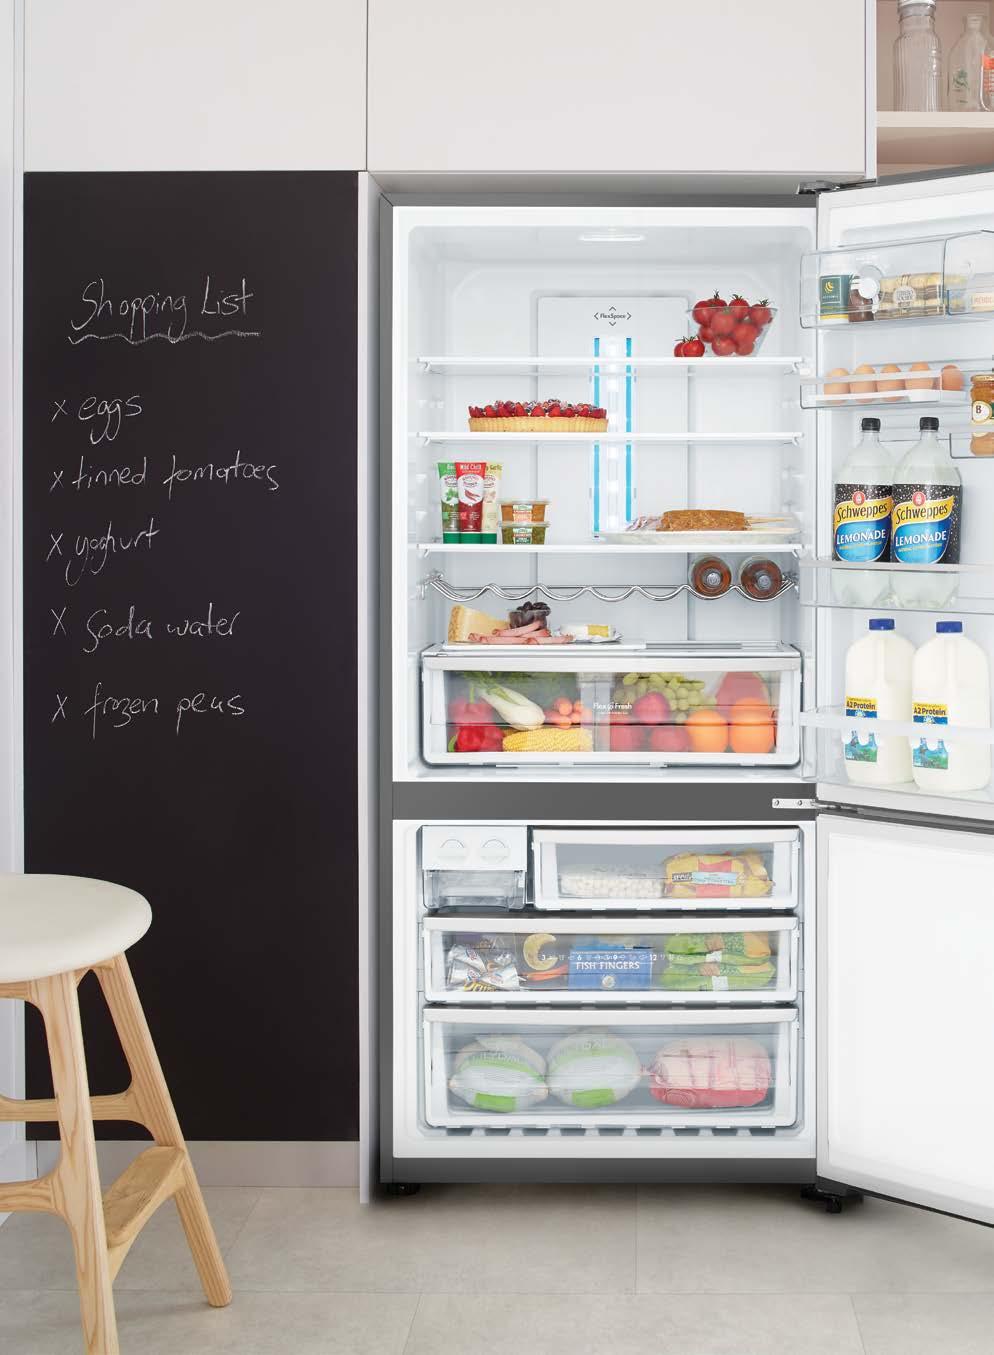 Choose the right fridge with estinghouse A fridge is a vital part of every home, but with so many to choose from it can be difficult to know which one is right for your family.